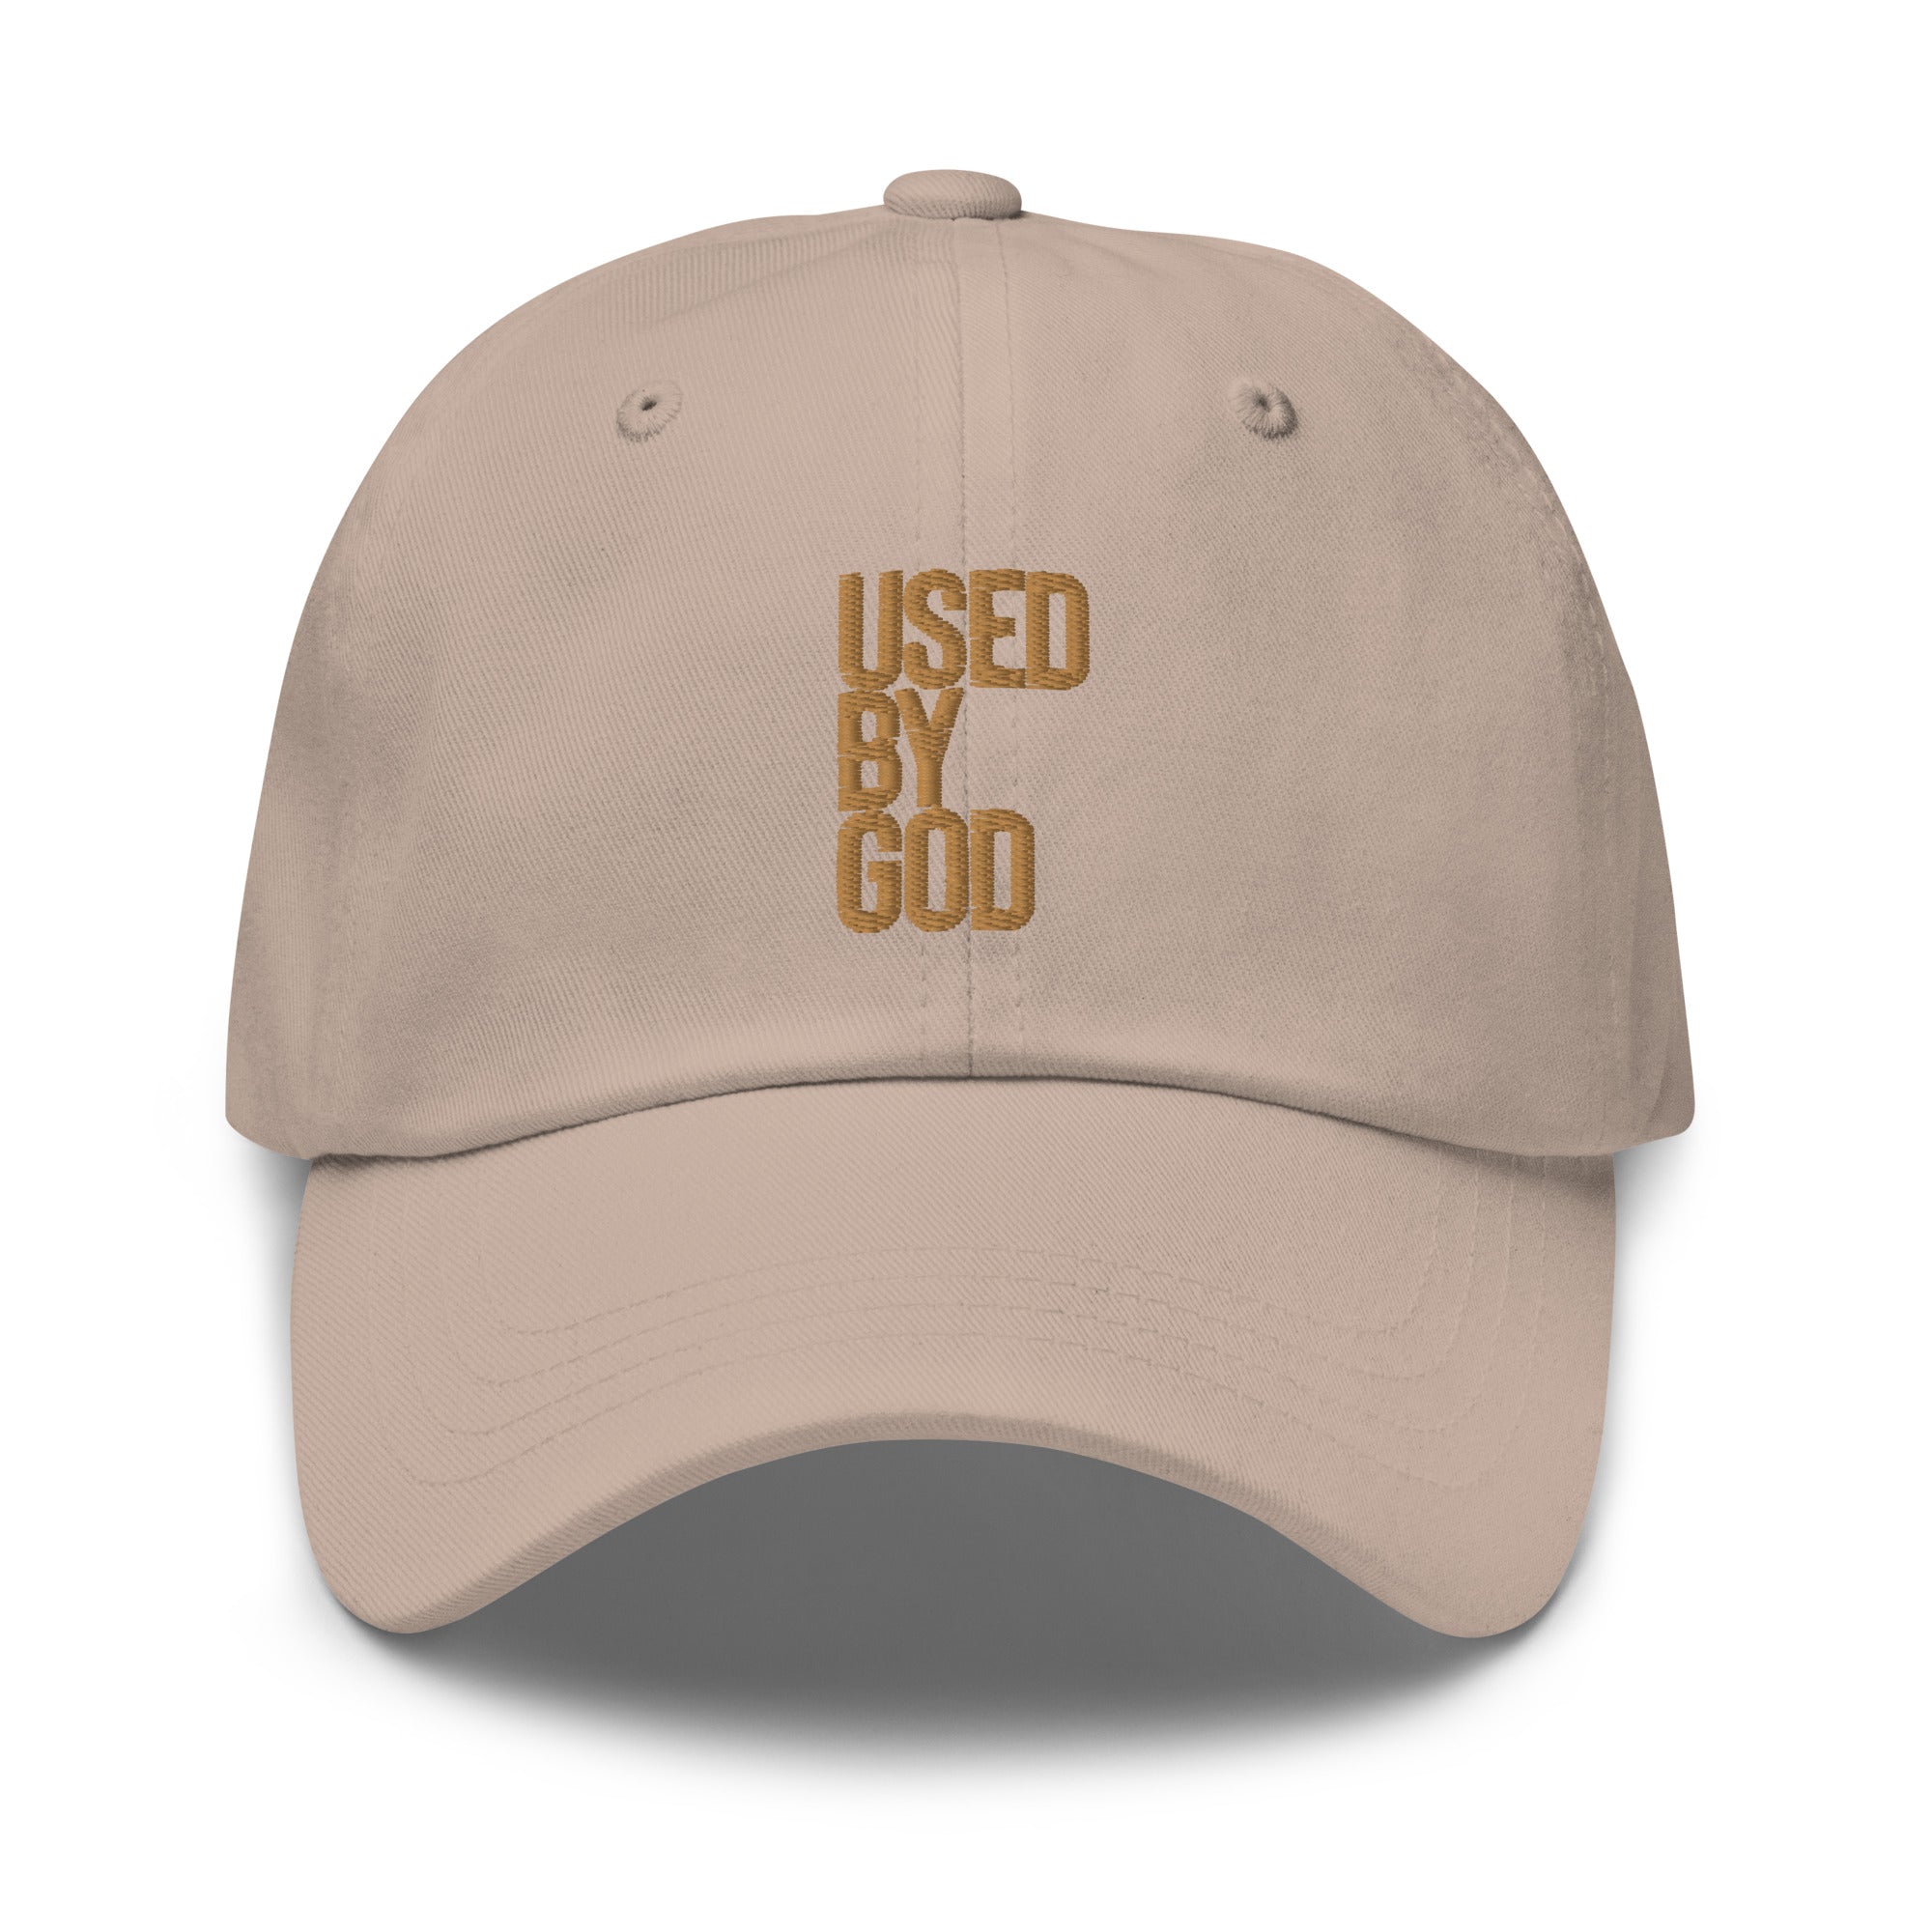 UBG Logo Caramel Dad Hat, Used By God, Used By God Clothing, Christian Apparel, Christian Hats, Christian T-Shirts, Christian Clothing, God Shirts, Christian Sweatshirts, God Clothing, Jesus Hoodie, Jesus Clothes, God Is Dope, Art Of Homage, Red Letter Clothing, Elevated Faith, Active Faith Sports, Beacon Threads, God The Father Apparel